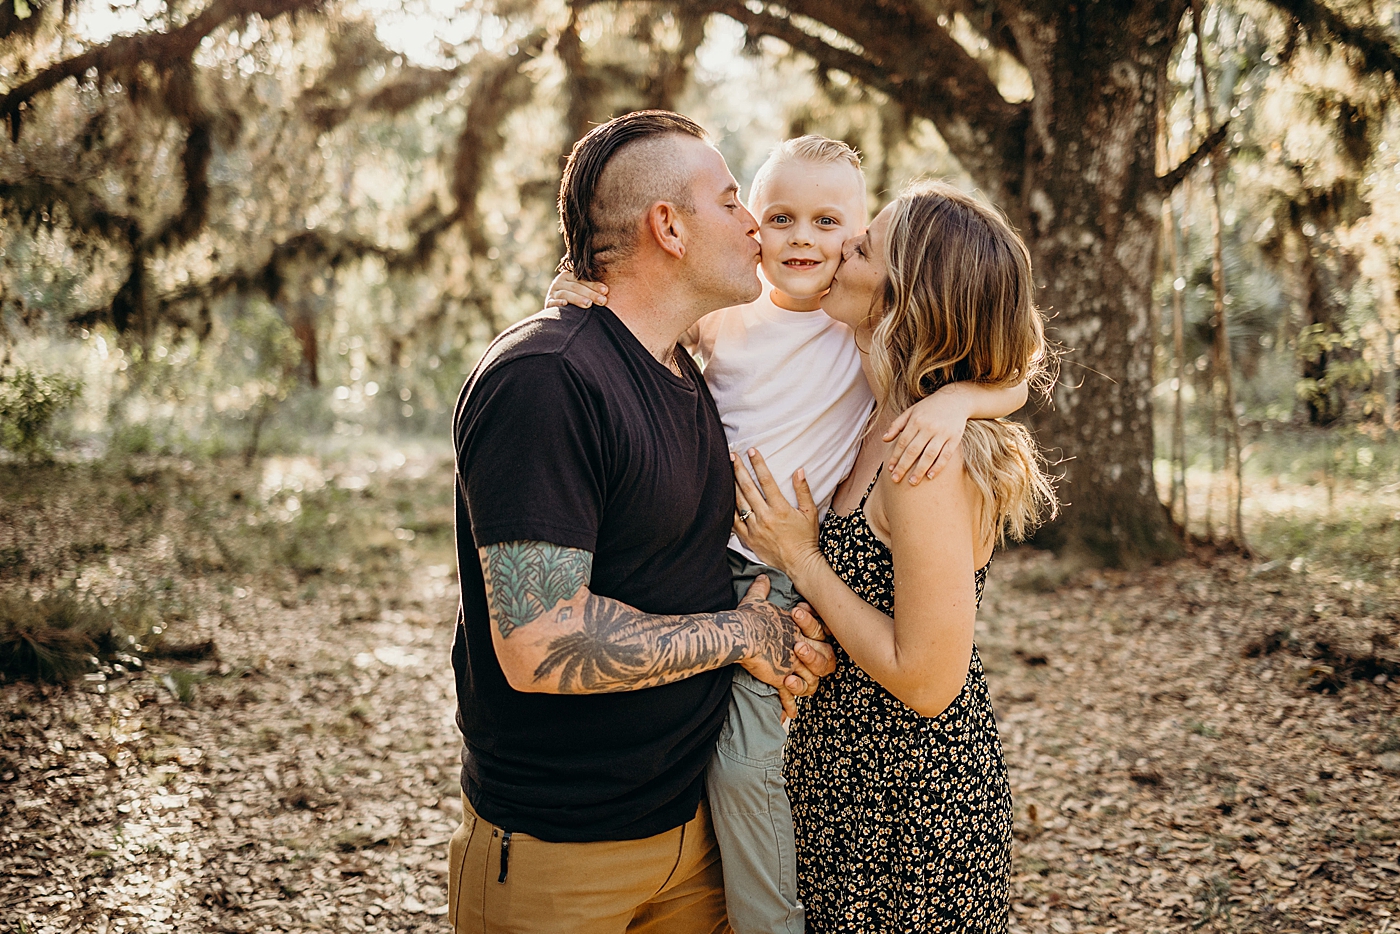 Parents hold child up and kiss them on the cheek Riverbend Park Family Photography by South Florida Family Photographer Maggie Alvarez Photography